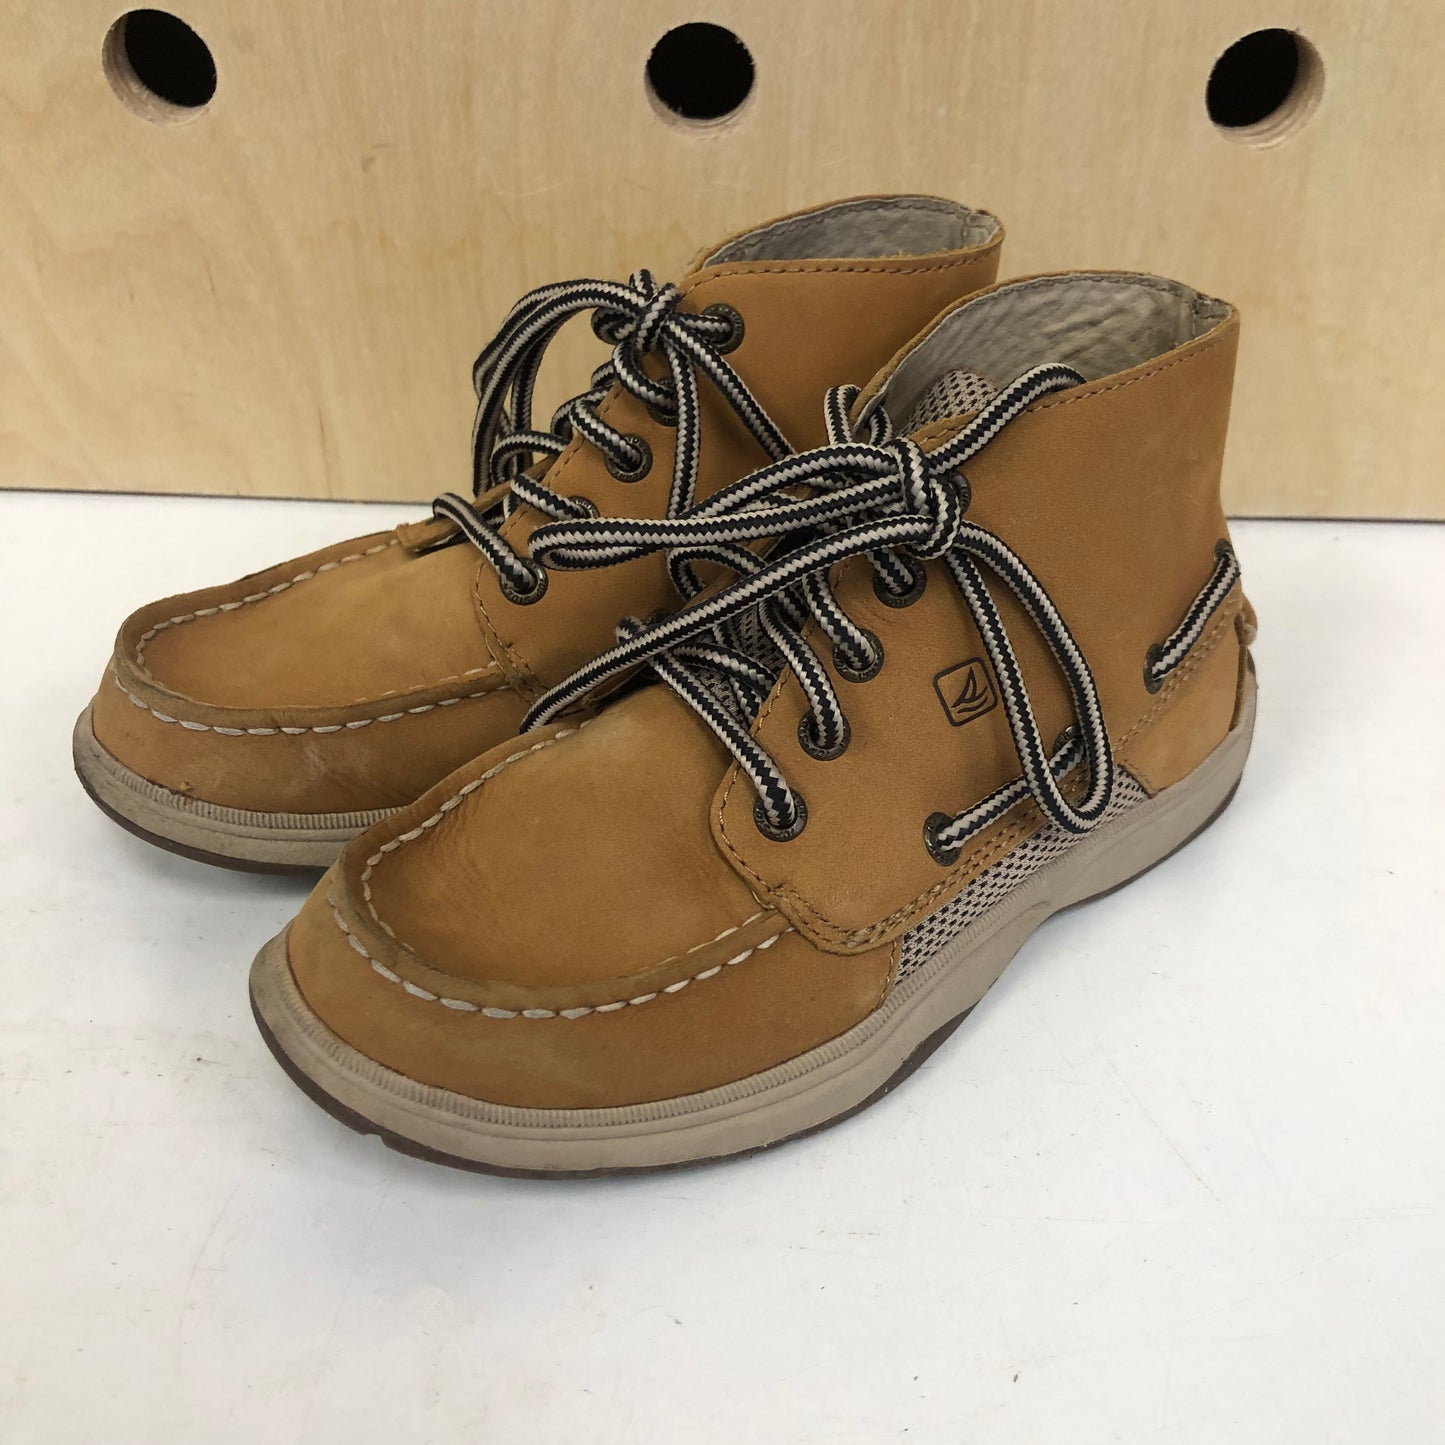 Tan Top Sider Boots